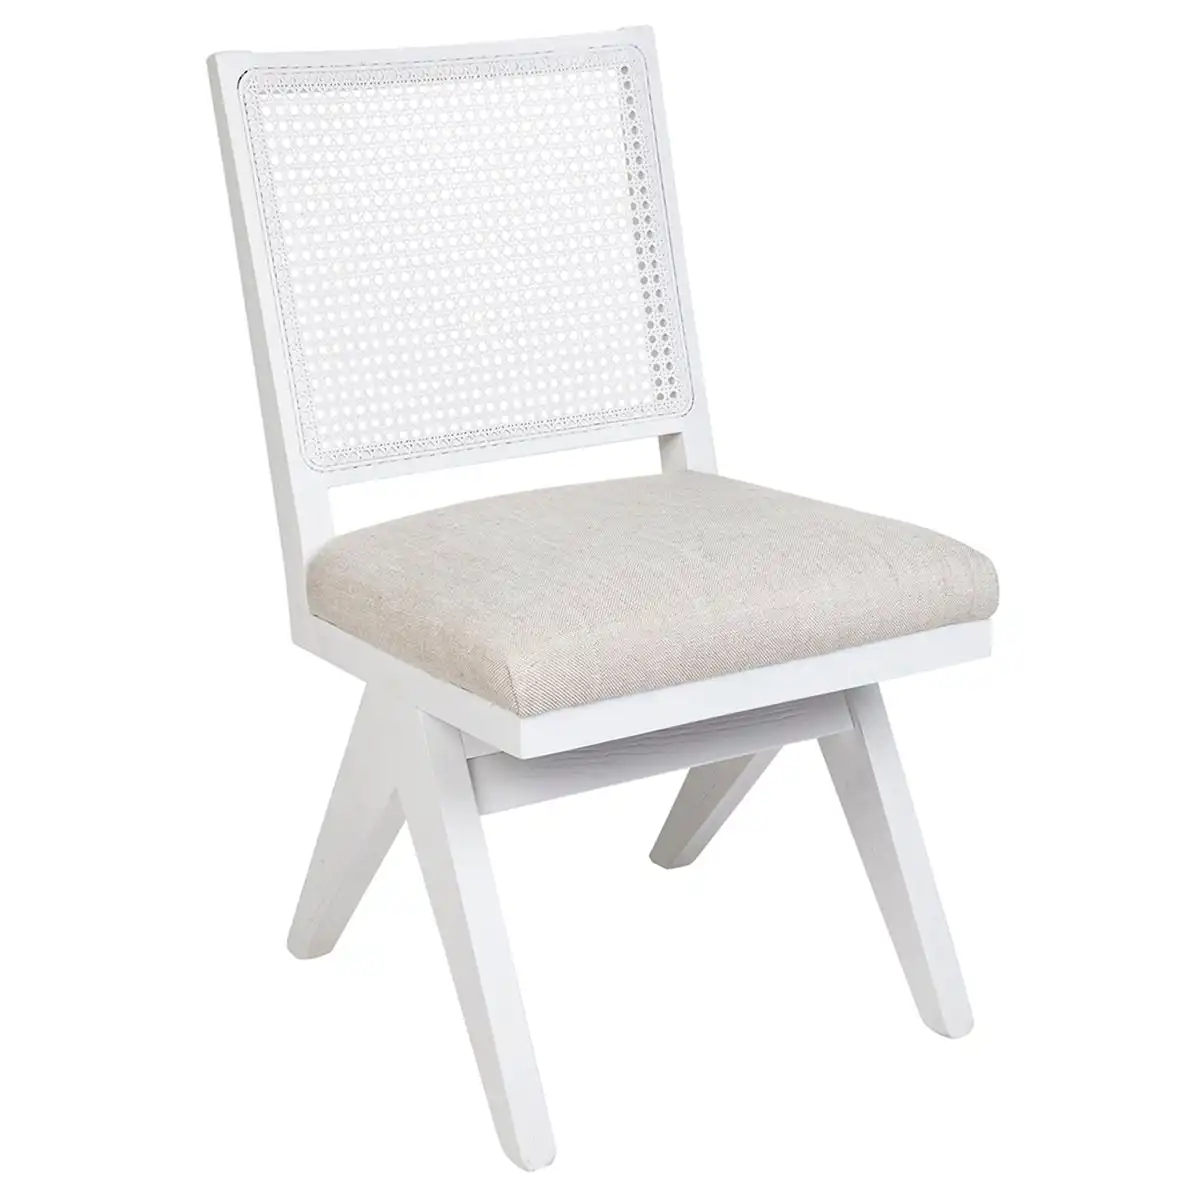 The Imperial White Rattan Dining Chair - Natural Linen